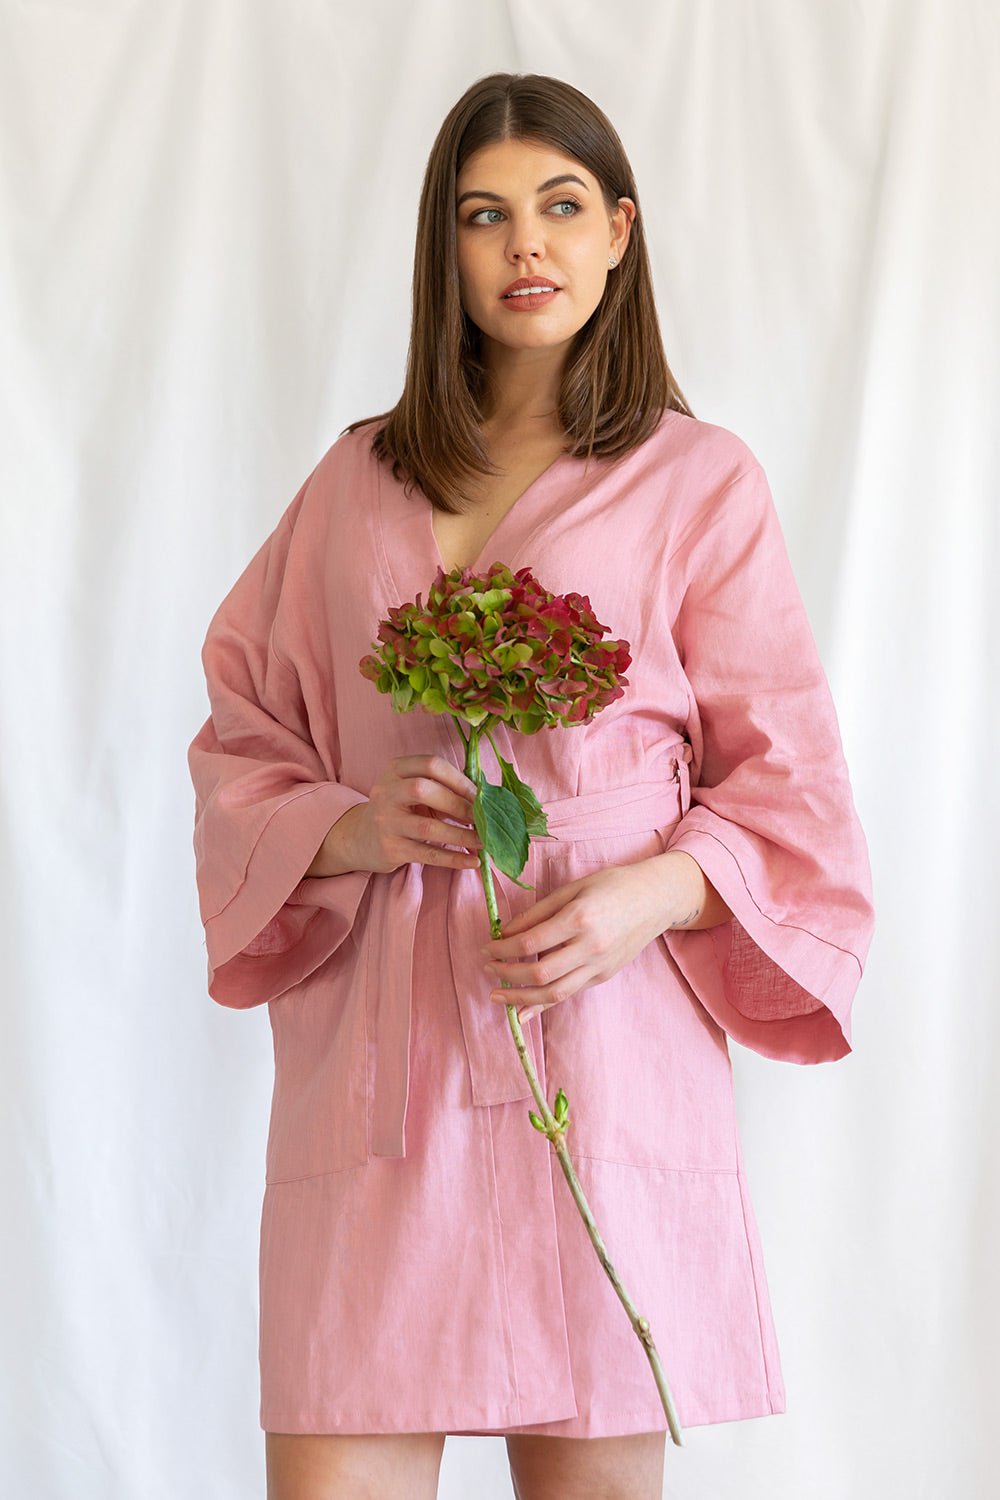 100% linen cotton robe designed in NZ pink dressing gown